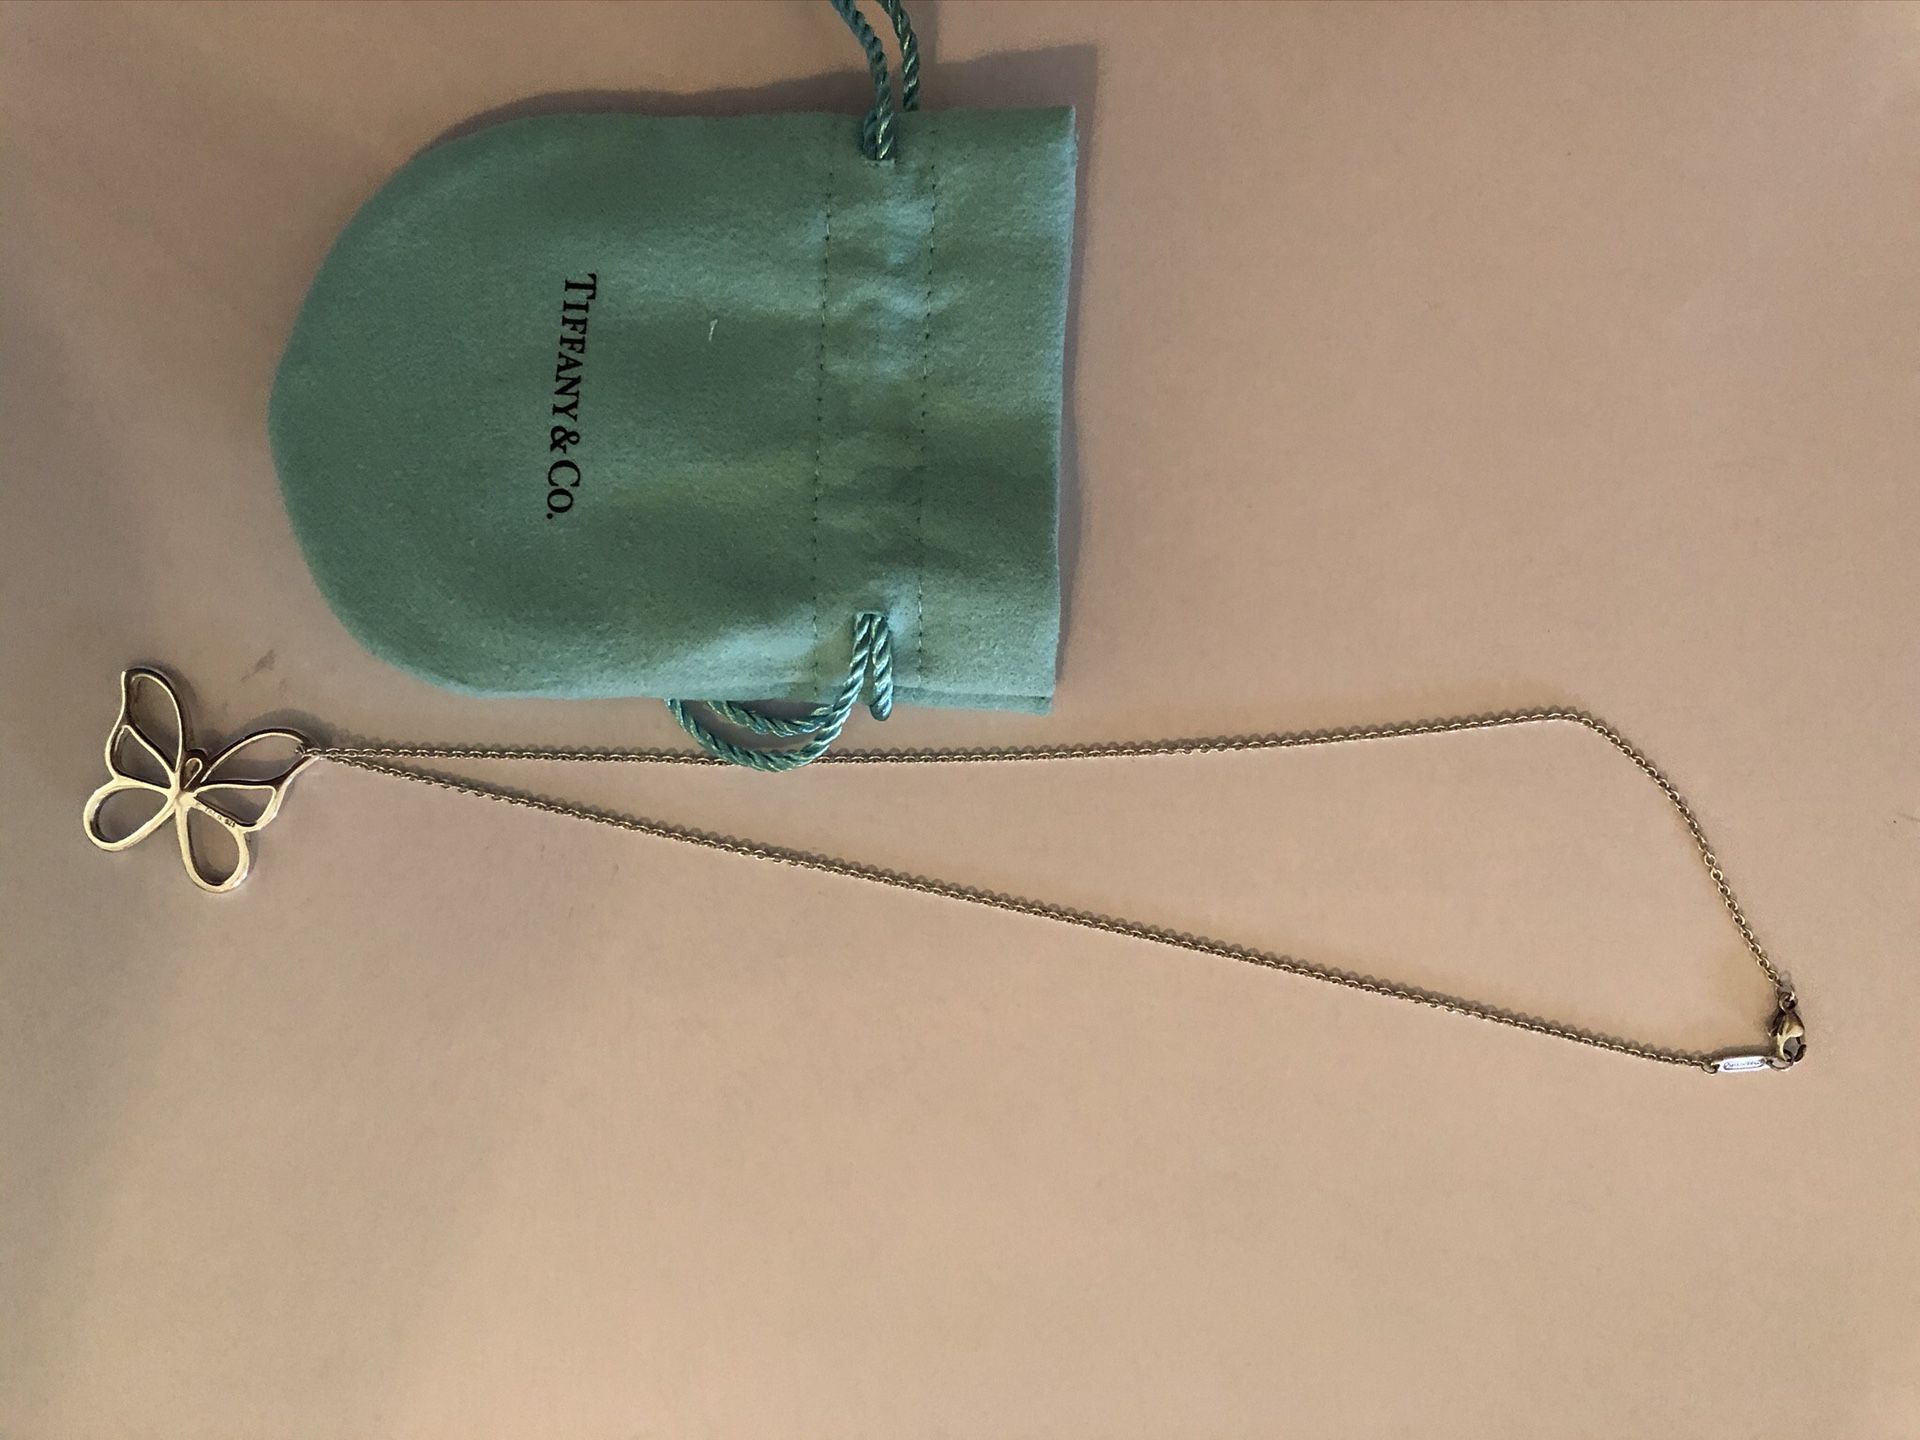 Tiffany & Co. charm butterfly necklace